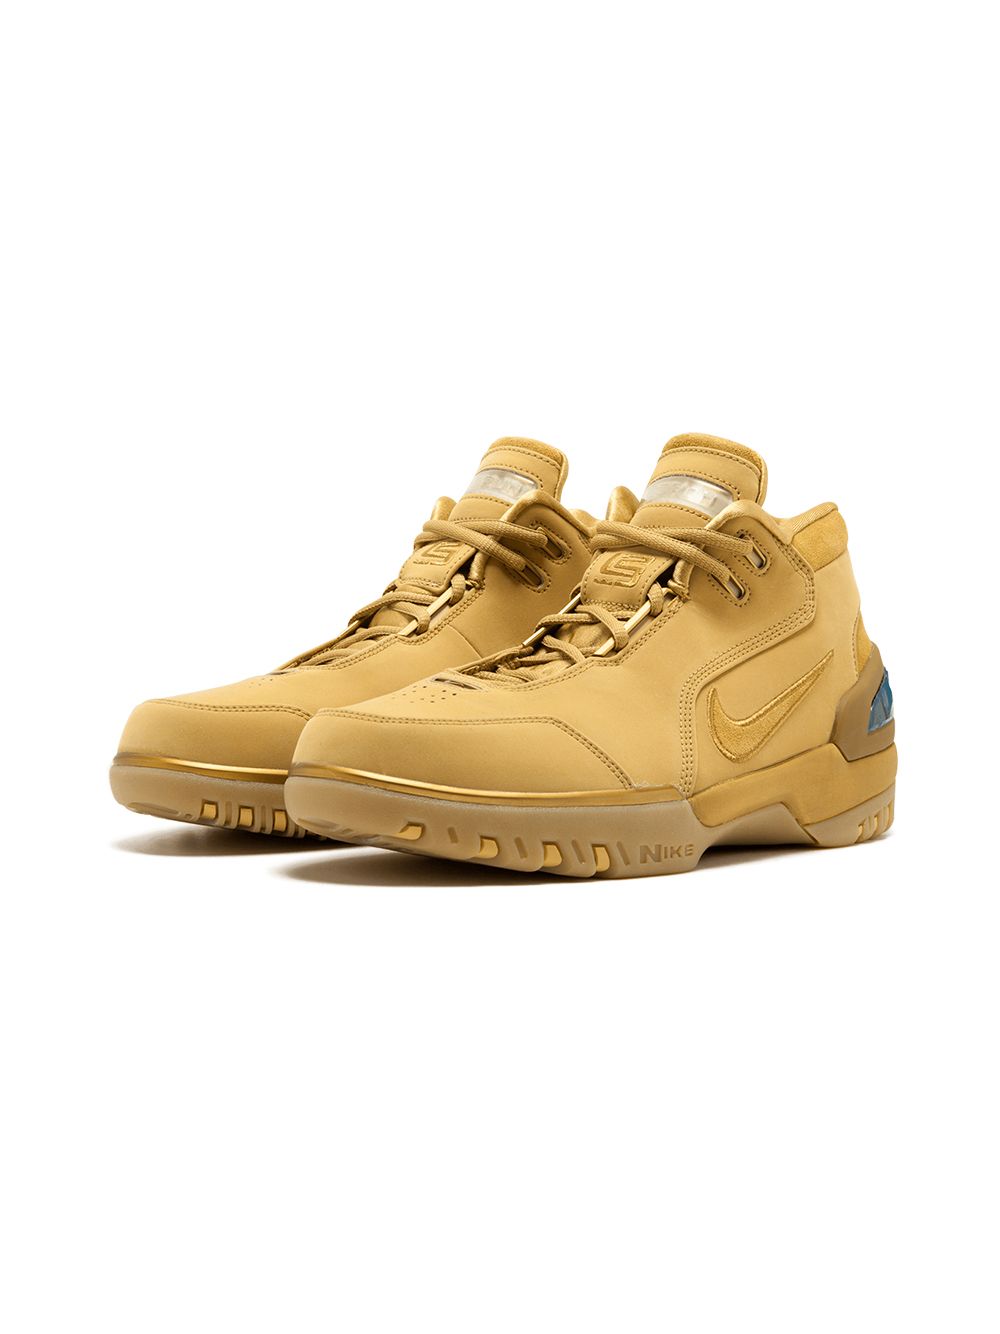 Image 2 of Nike Air Zoom Generation ASG QS "Wheat" sneakers